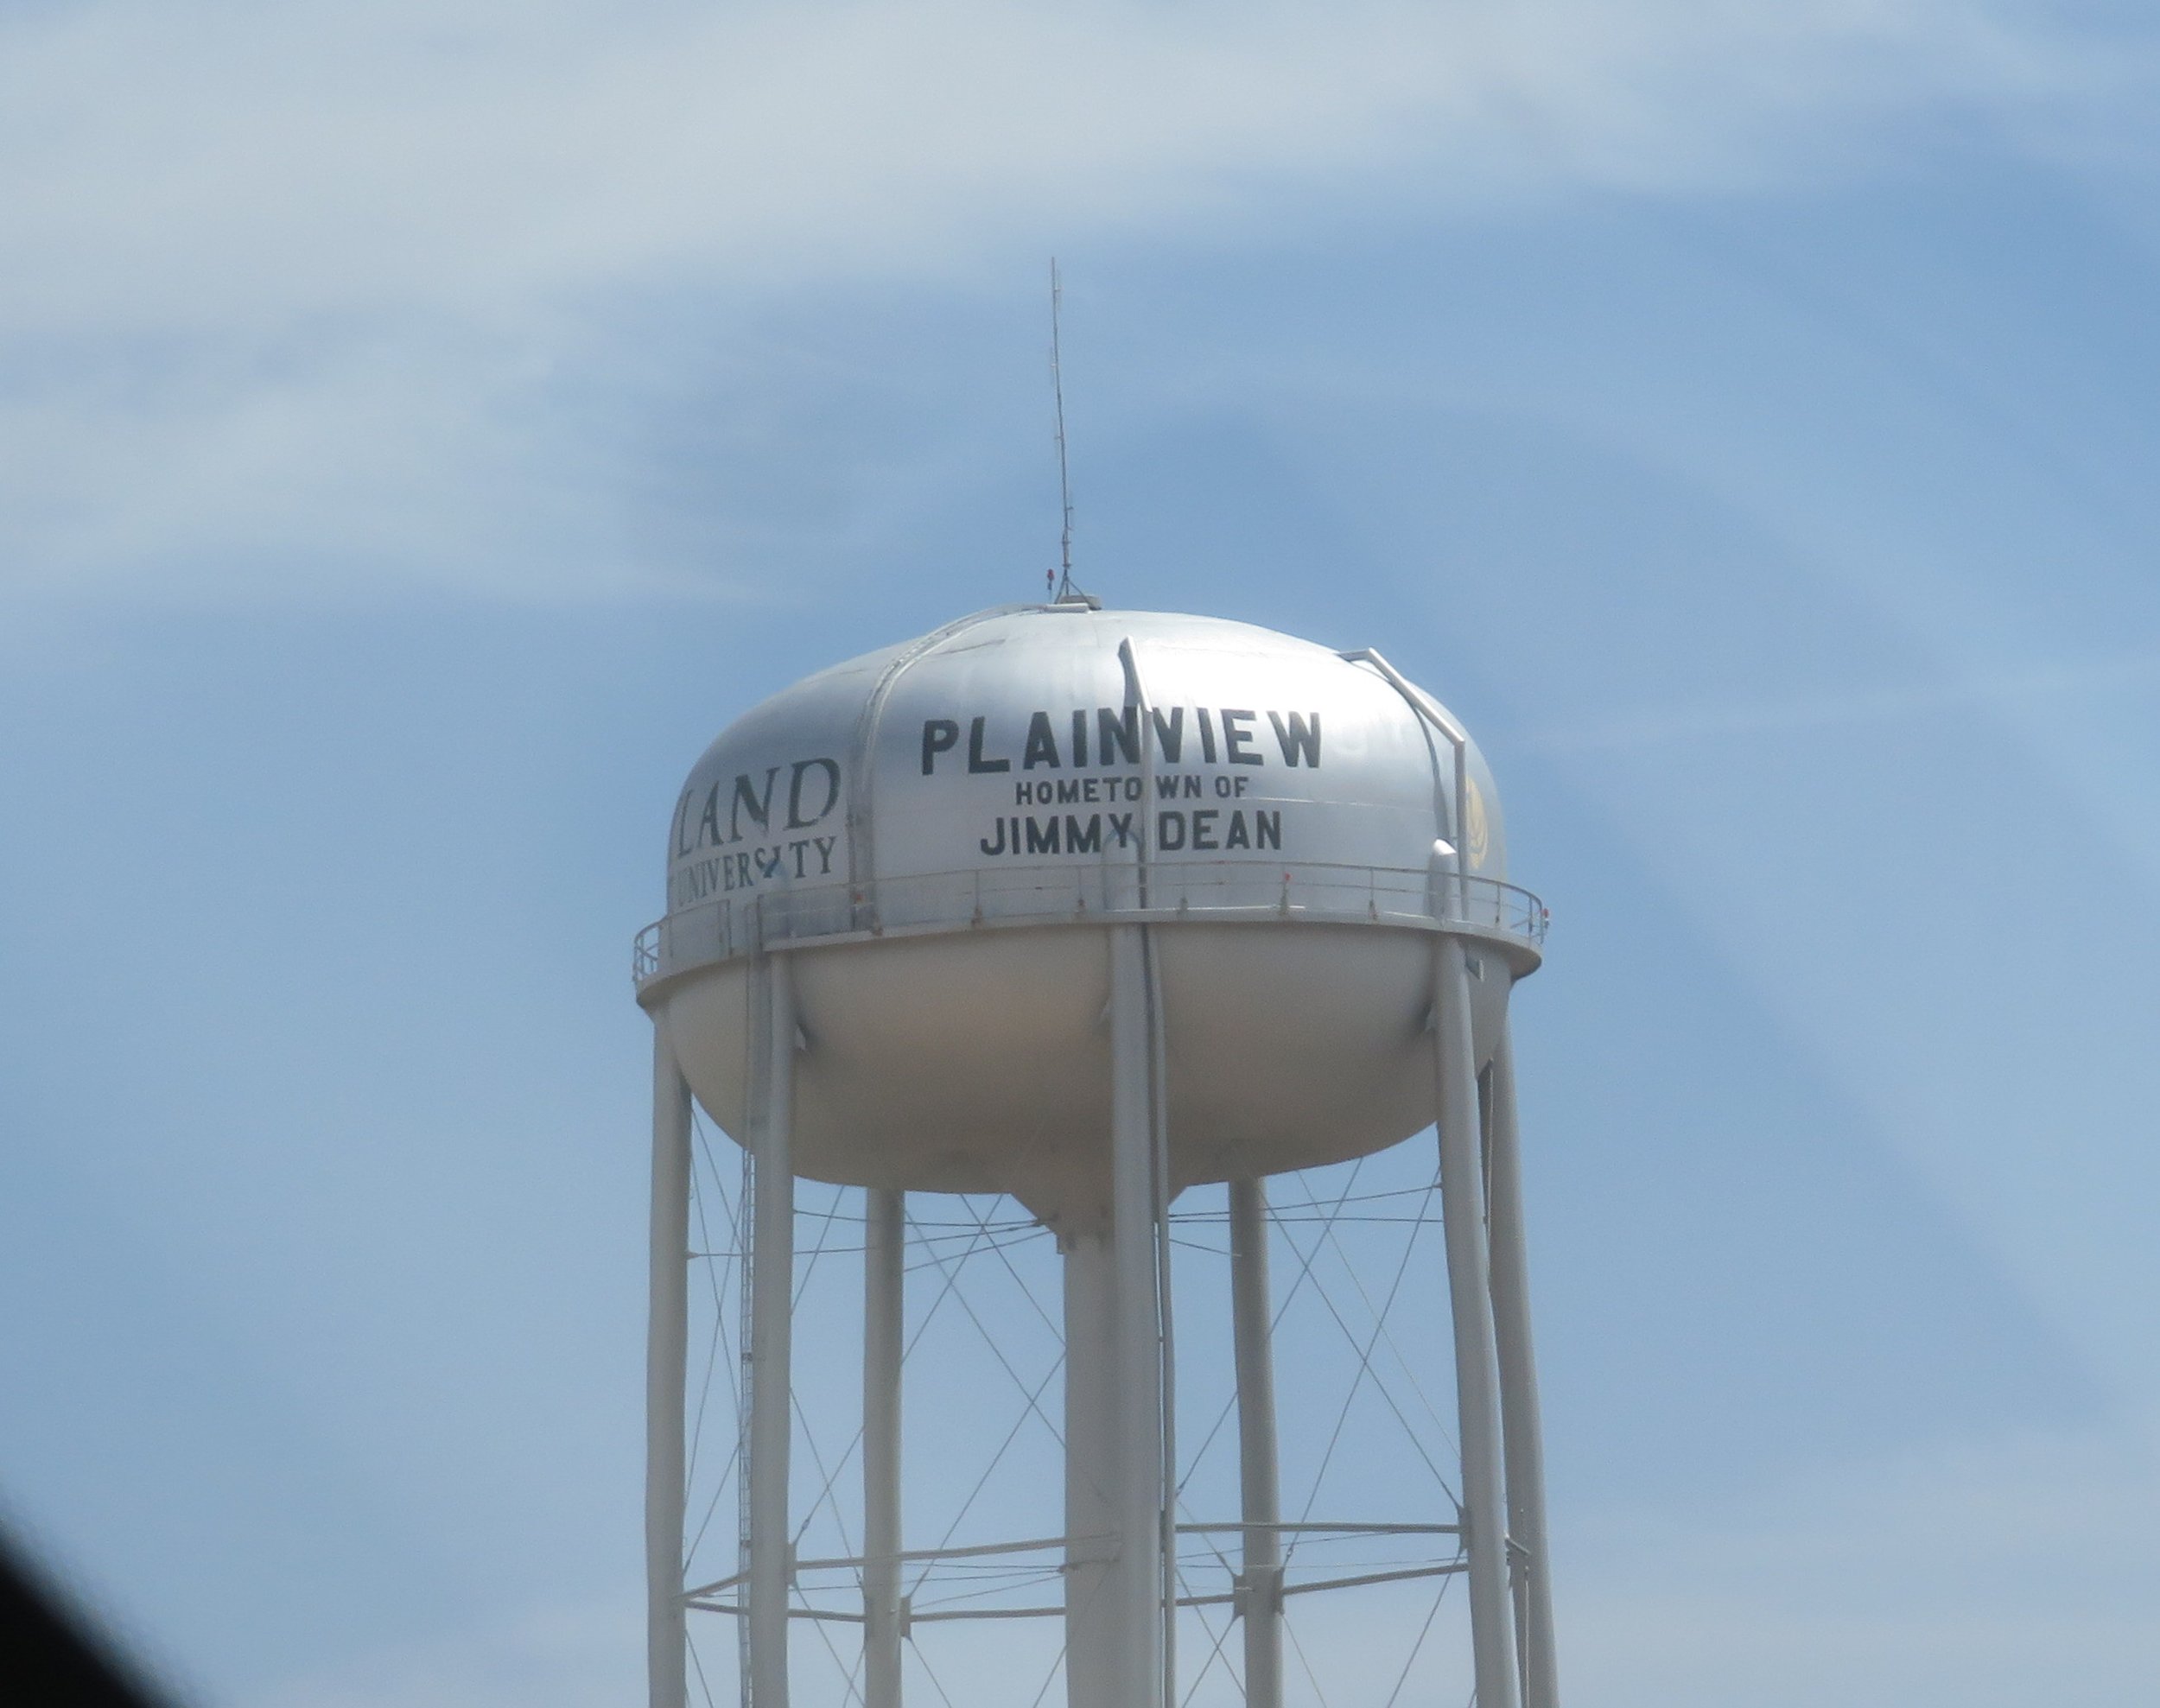 Even the water tower shouts his name.